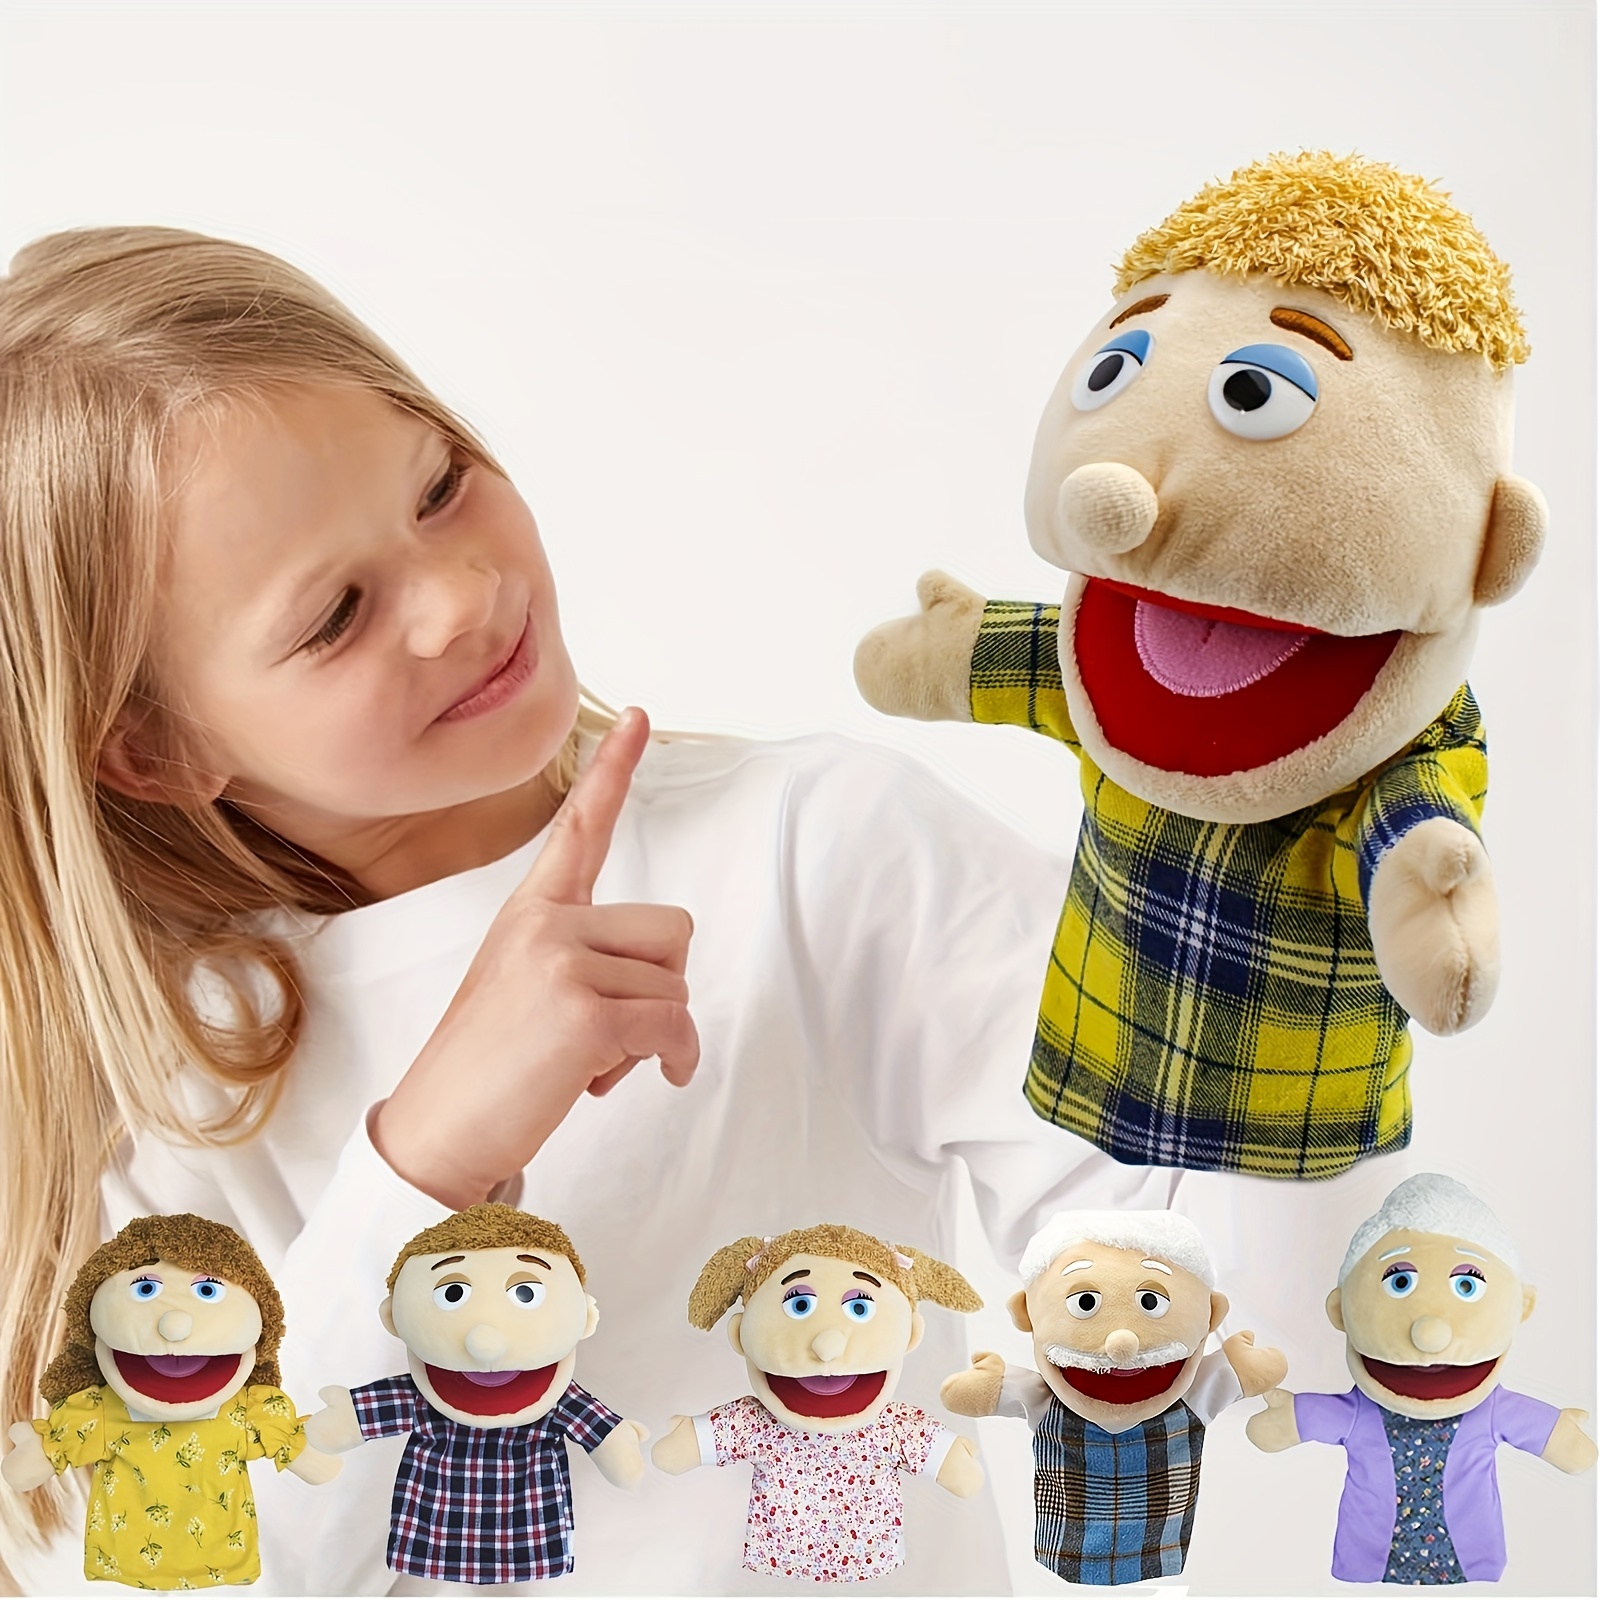 

Family Hand Puppets, Puppets For Role Paly Family Members 13.4 Inch Multi-ethnic Puppets Plush Soft Hand Puppets Family Puppets Story Toys, Christmas Halloween Thanksgiving Gift